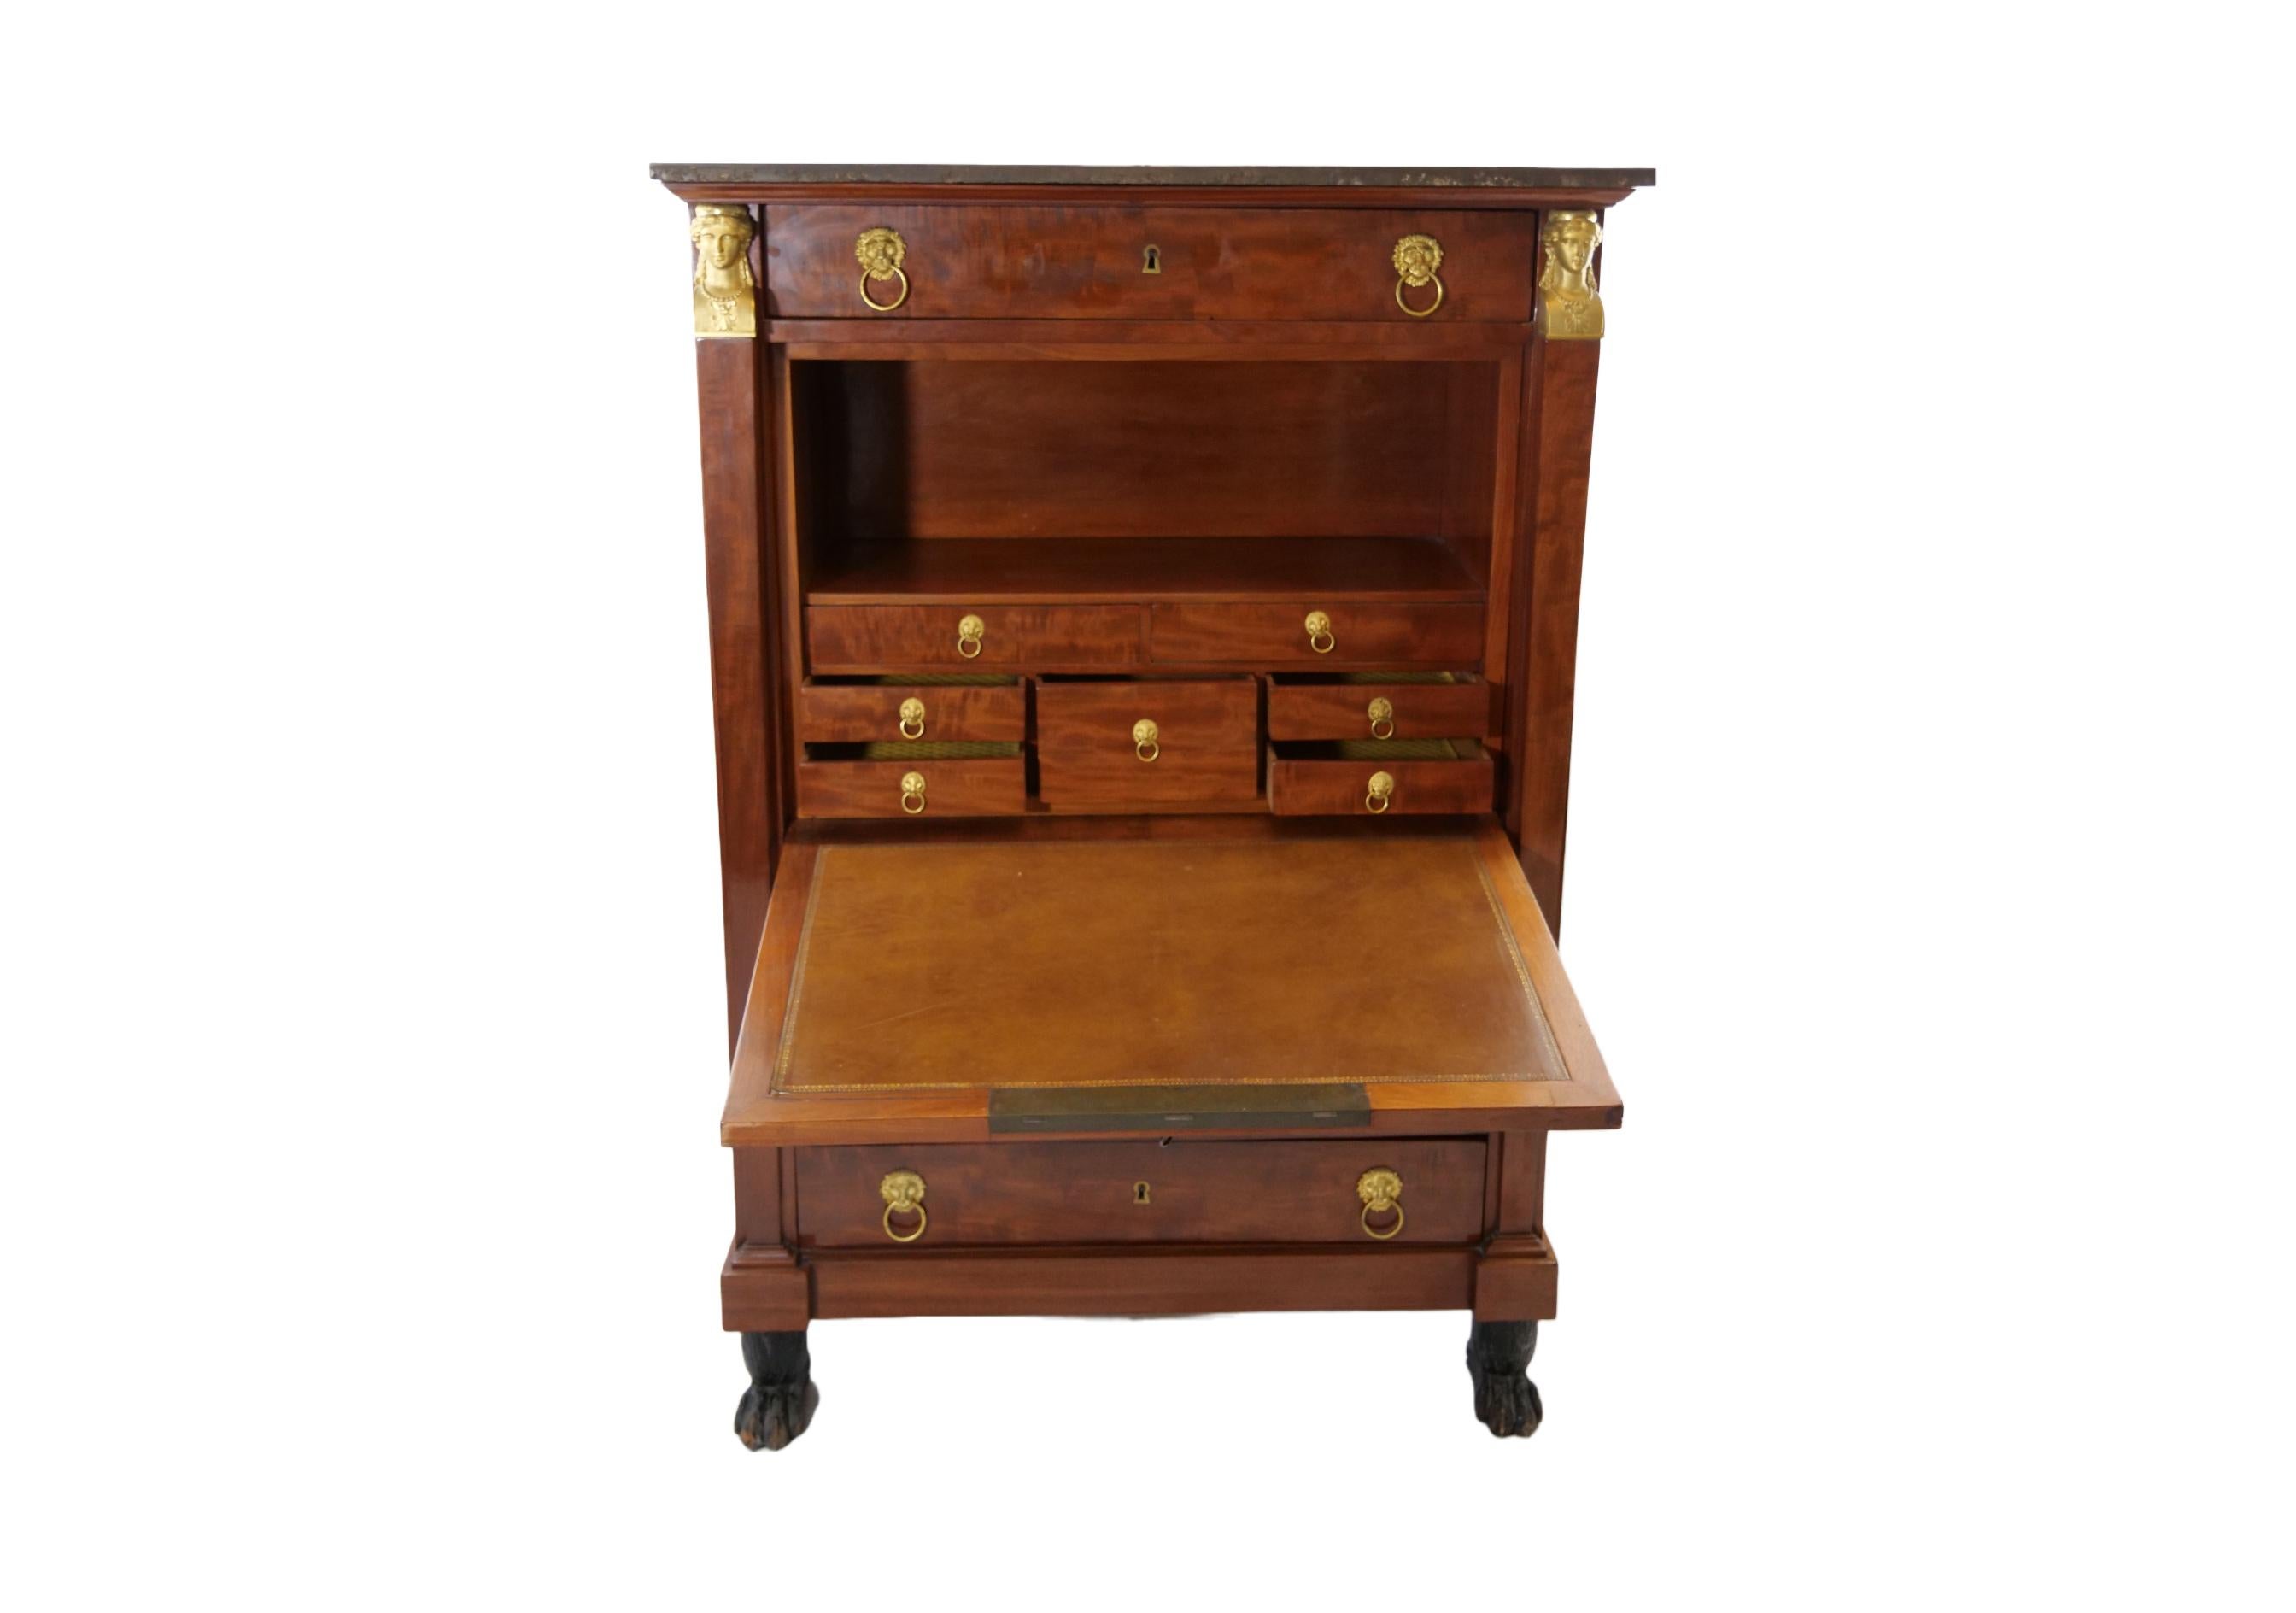 Early 19th century French mahogany wood Empire style drop front secretary with a removable black marble top. The secretary features two front side columns with bronze mounts detail with three pull drawers below and one drawer above resting on four